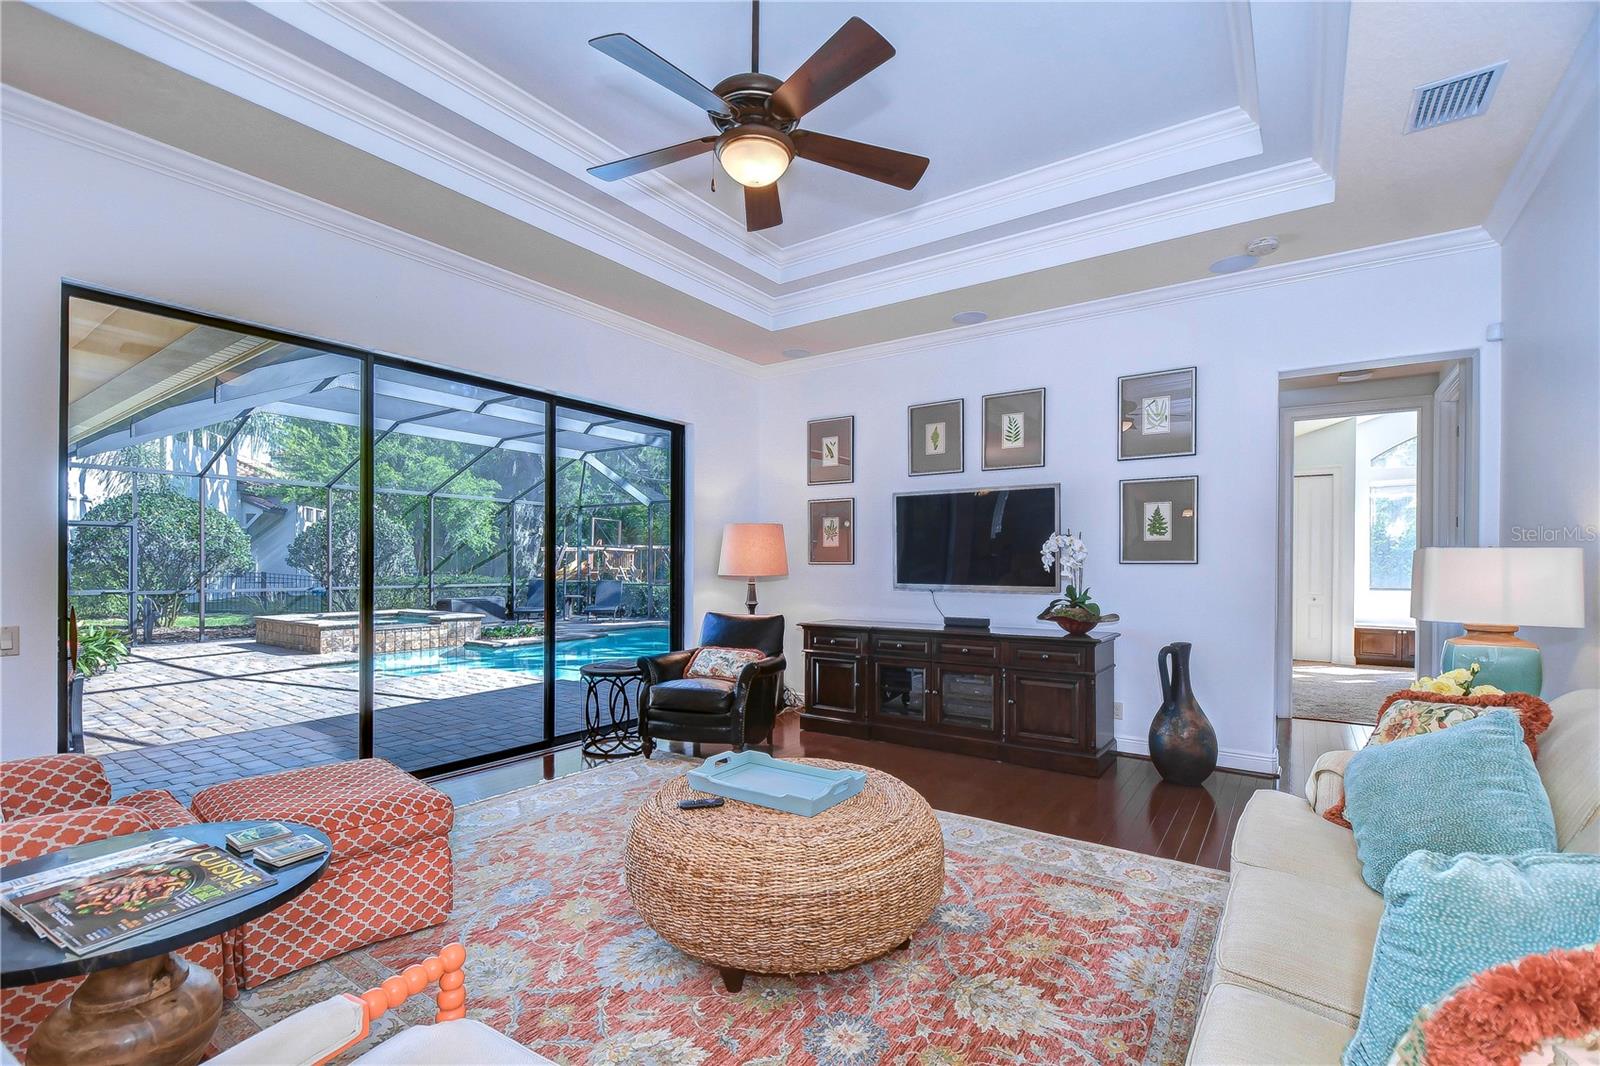 Family room features a wall of sliders, an elevated tray ceiling, and built-in ceiling speakers!